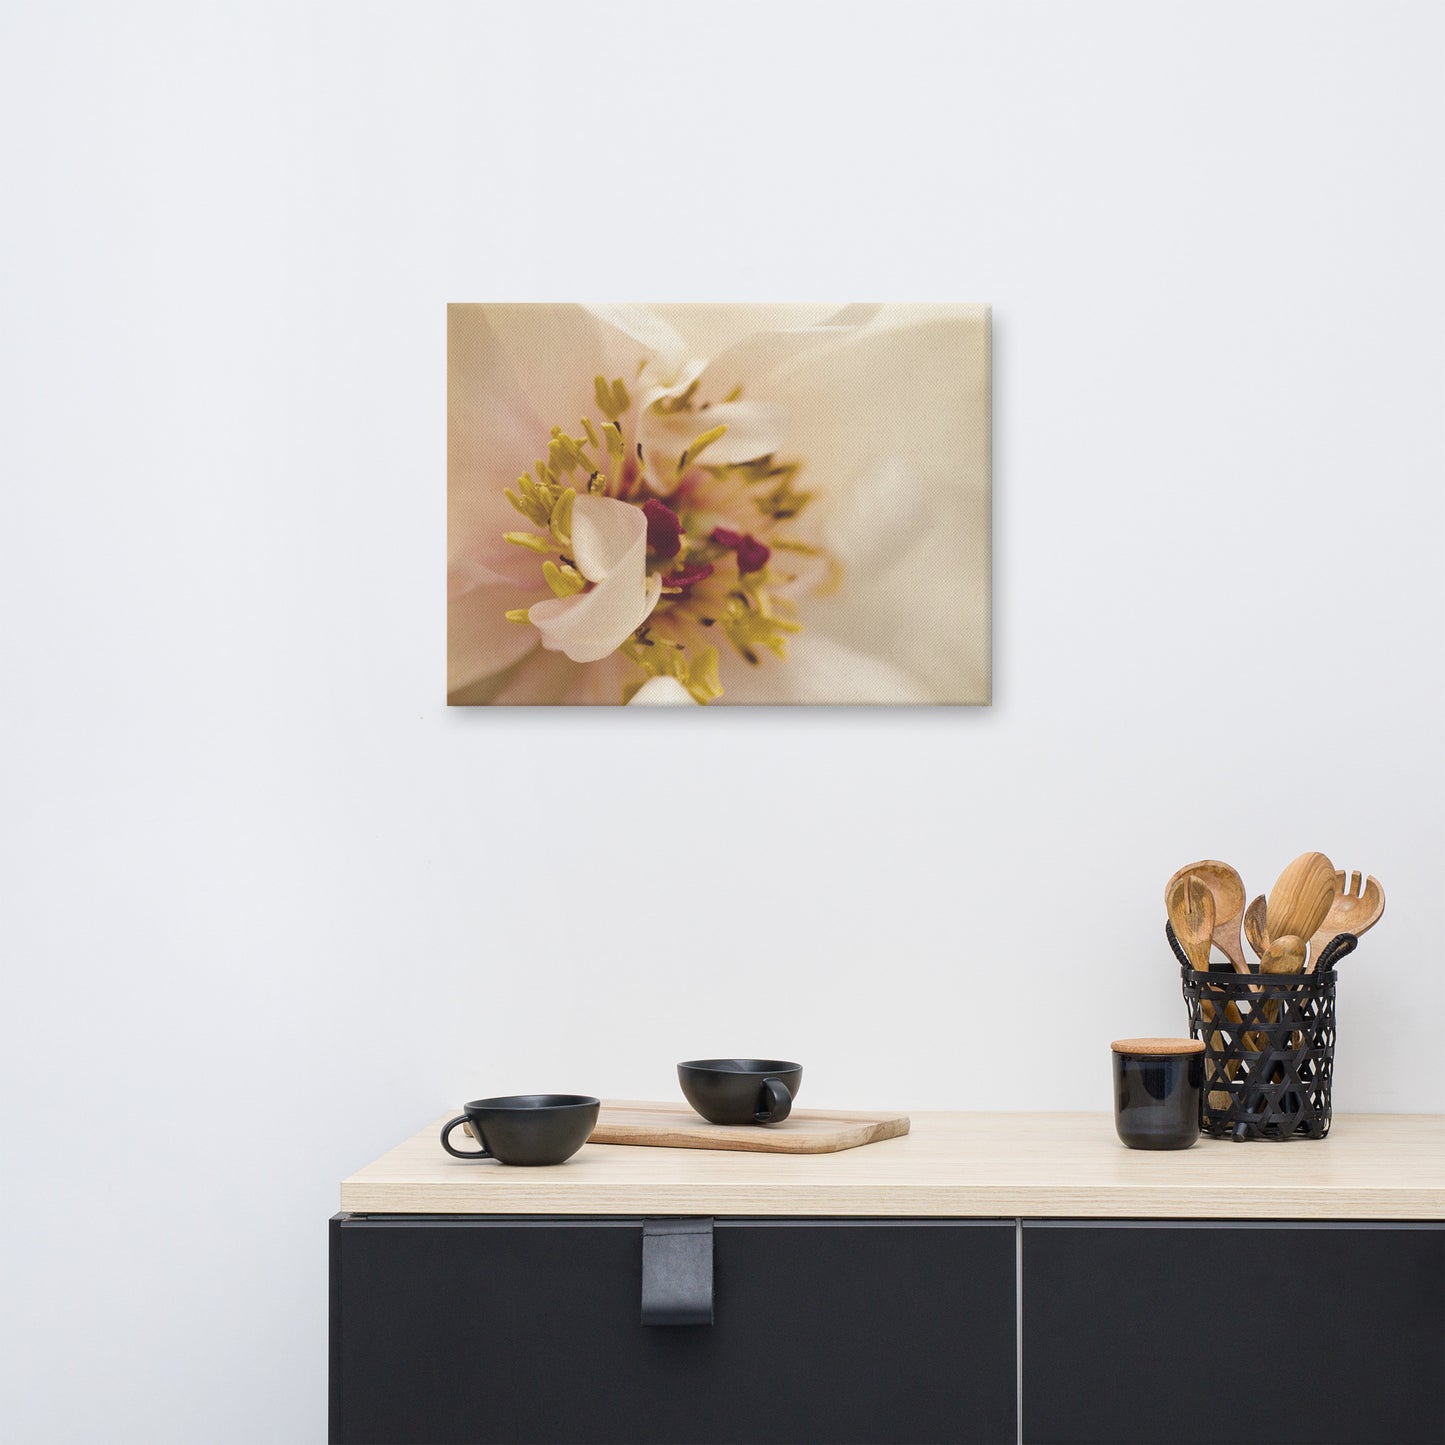 Eye of Peony Moody Midnight Floral Nature Canvas Wall Art Prints